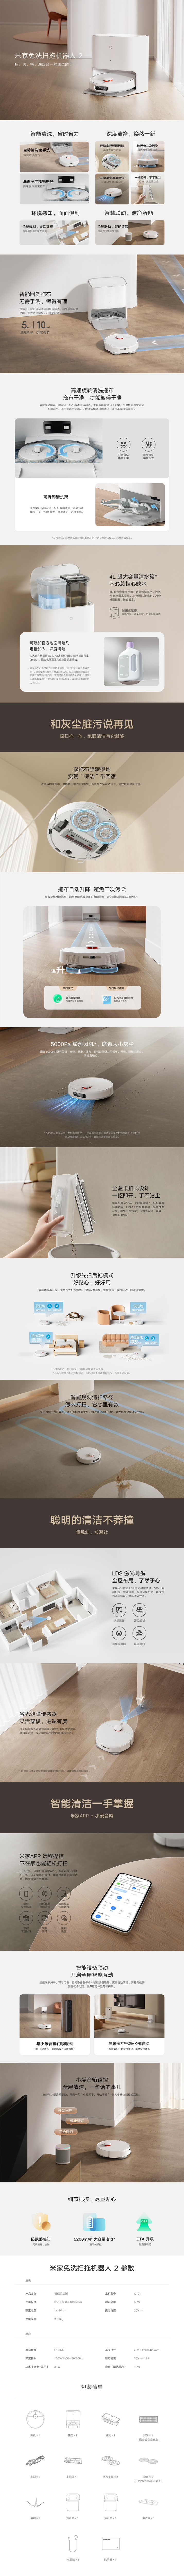 XiaoMi Mijia Disposable Sweeping and Mopping Robot2 